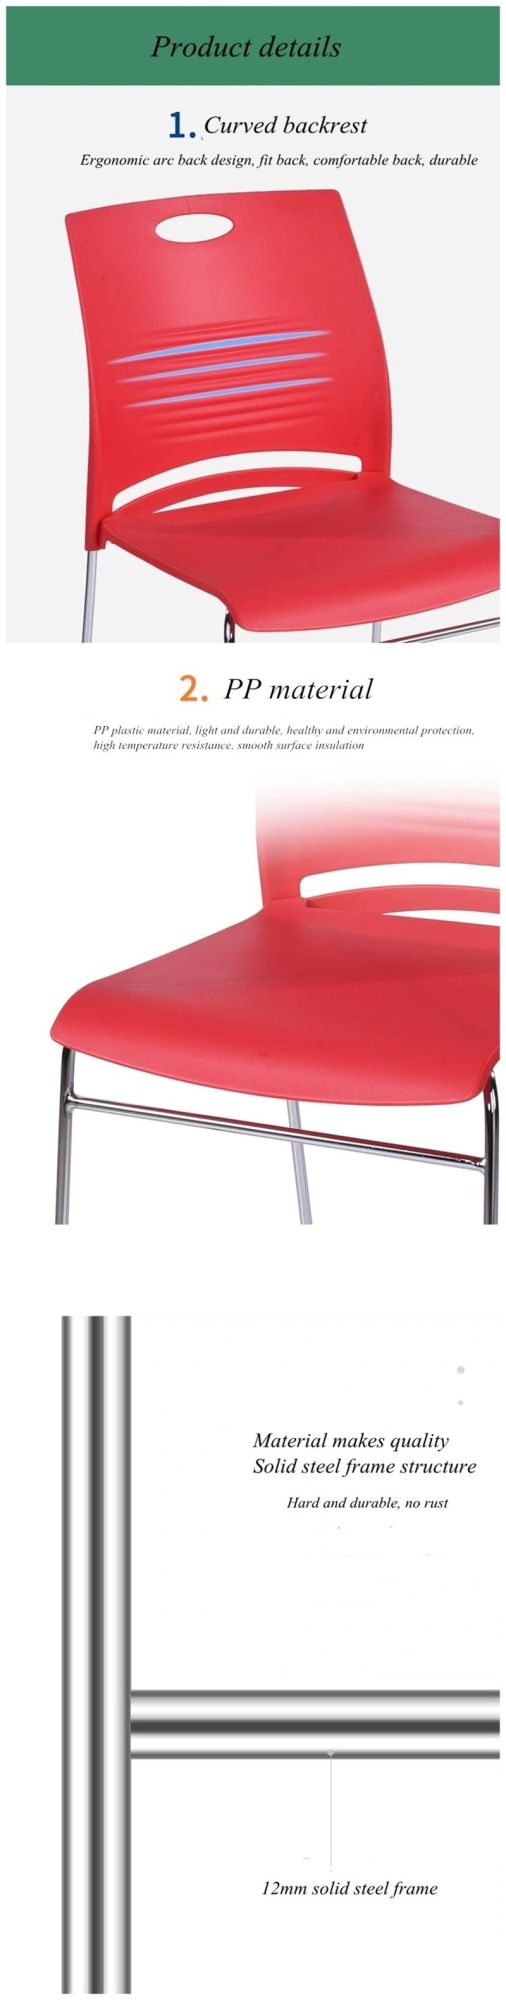 Modern Office School Meeting Waiting Room Metal Frame Legs Chairs with Writing Tablet Black Plastic Backrest and Fabric Foam Cushion Seat Training Chair